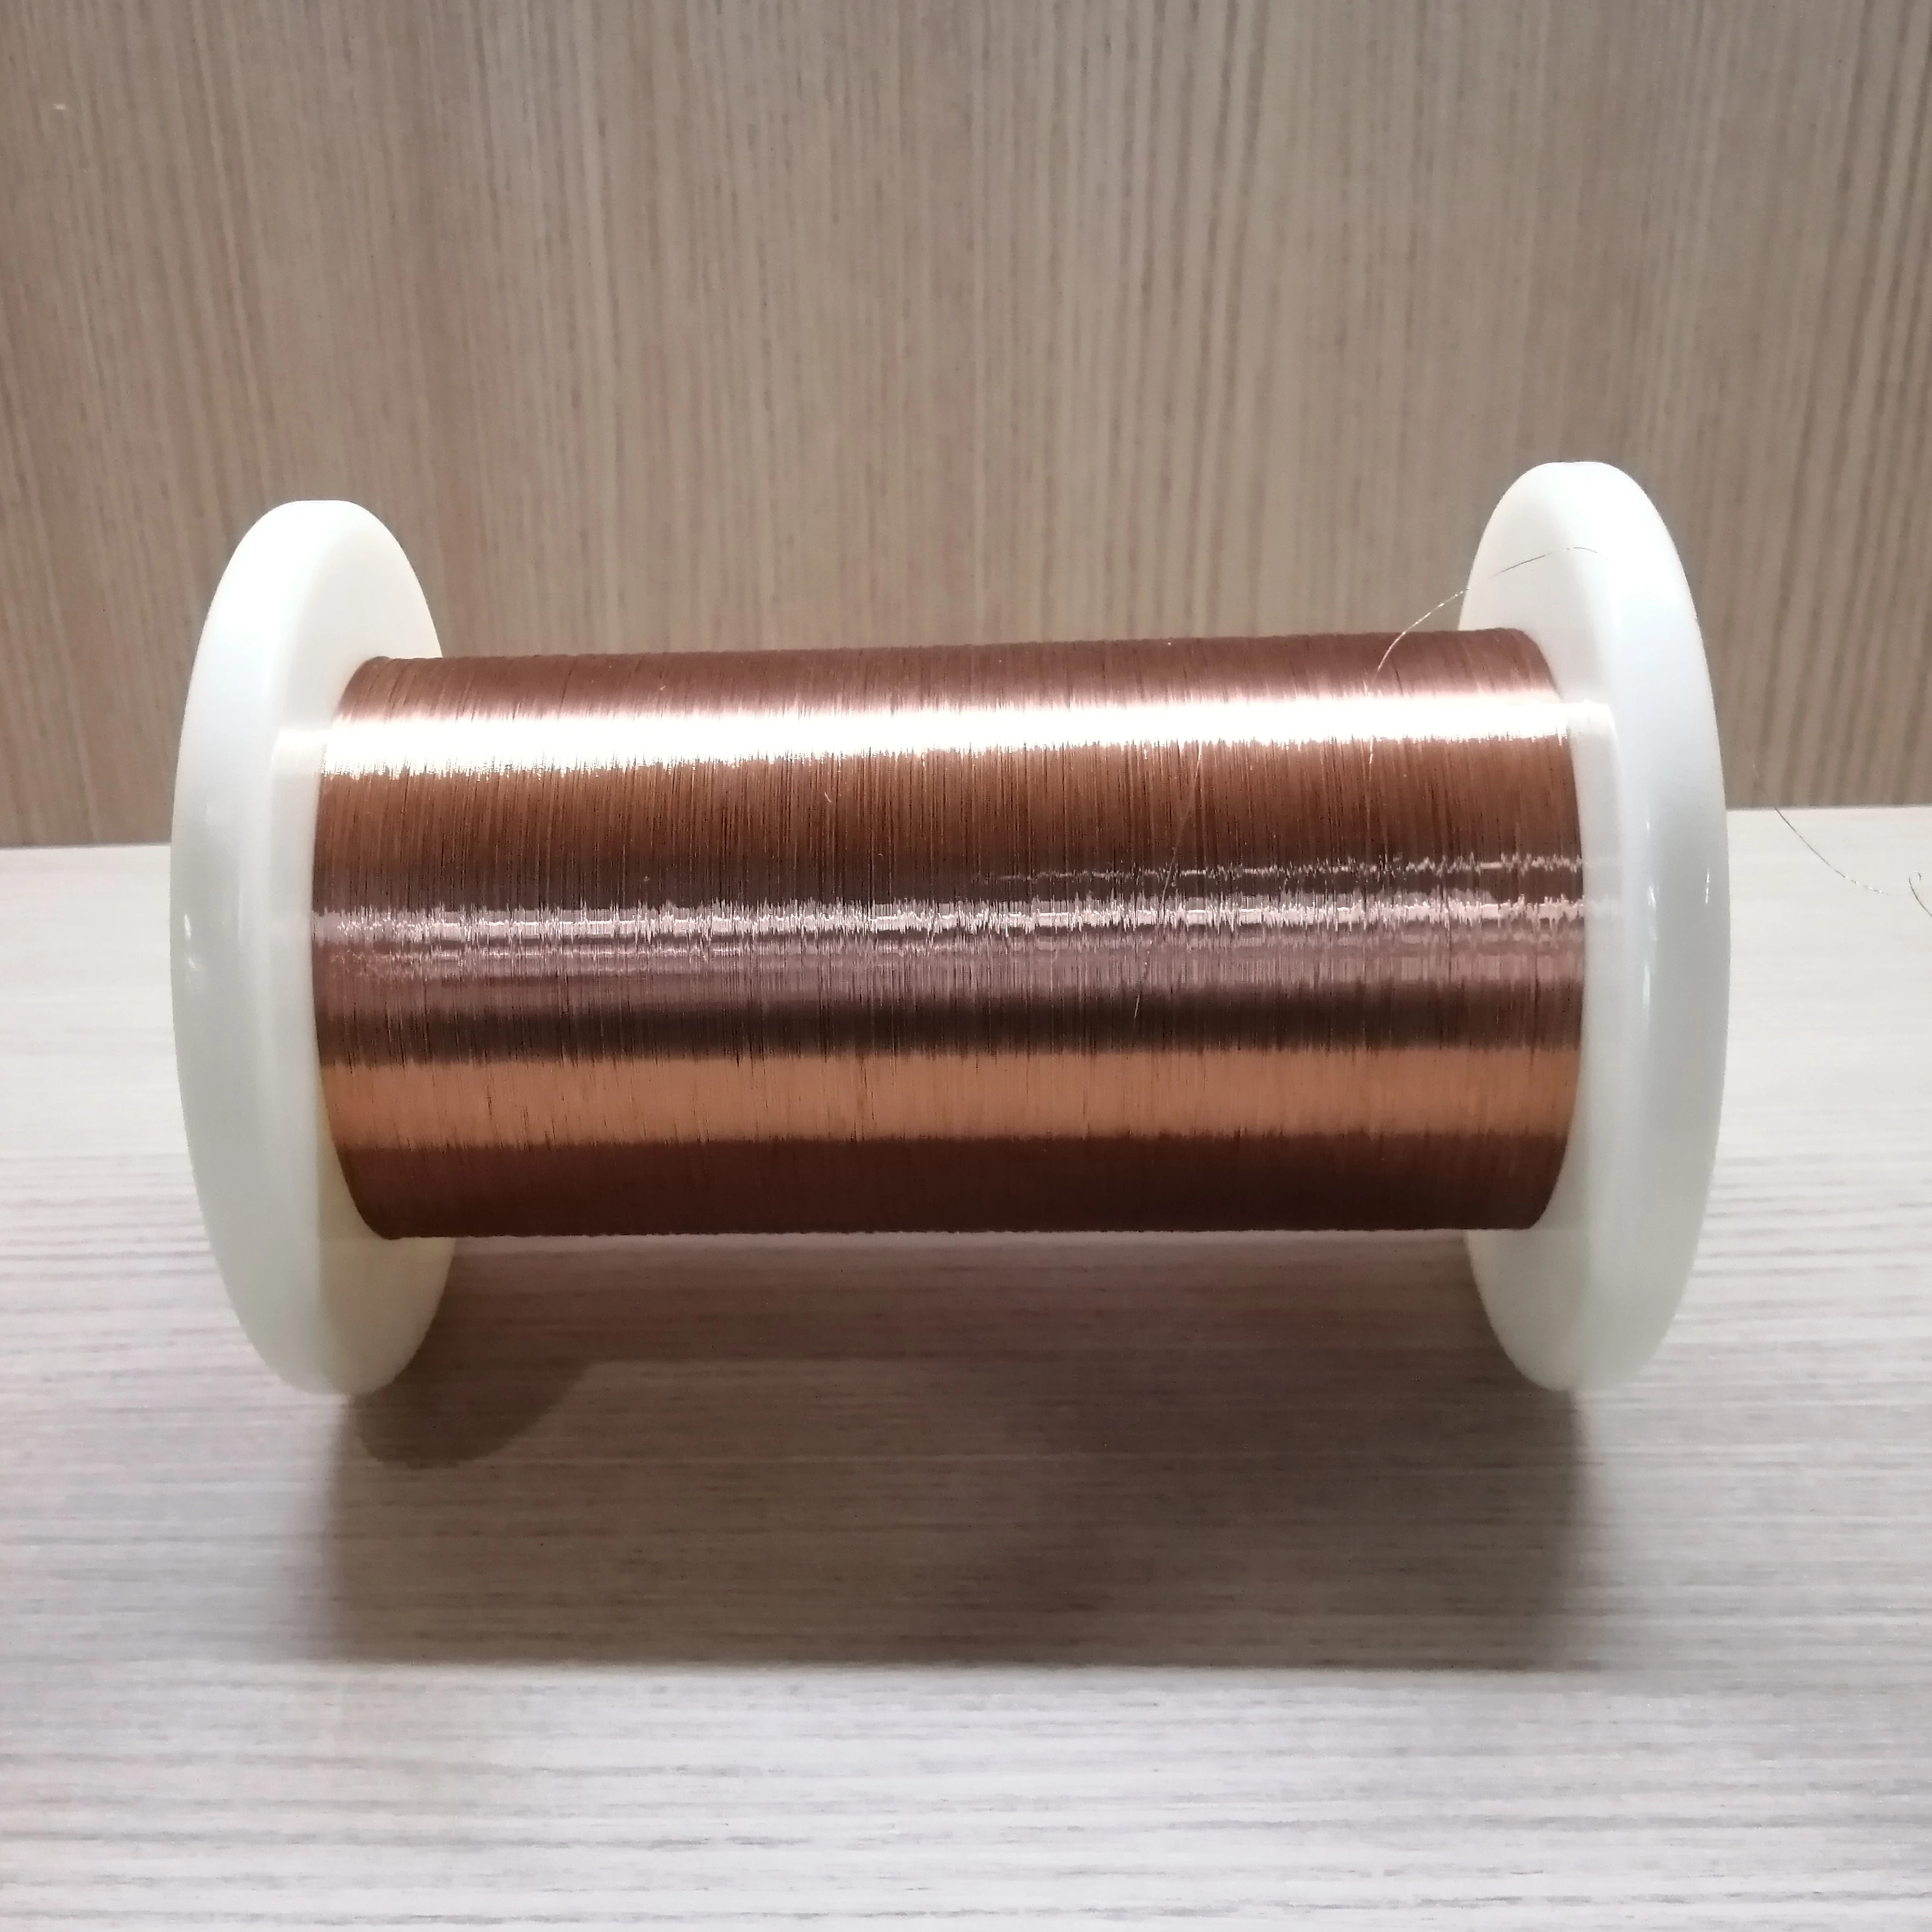 Ultra-fine enameled wires 0.075mm Polyesterimide enameled round copper wires with self bonding layer.